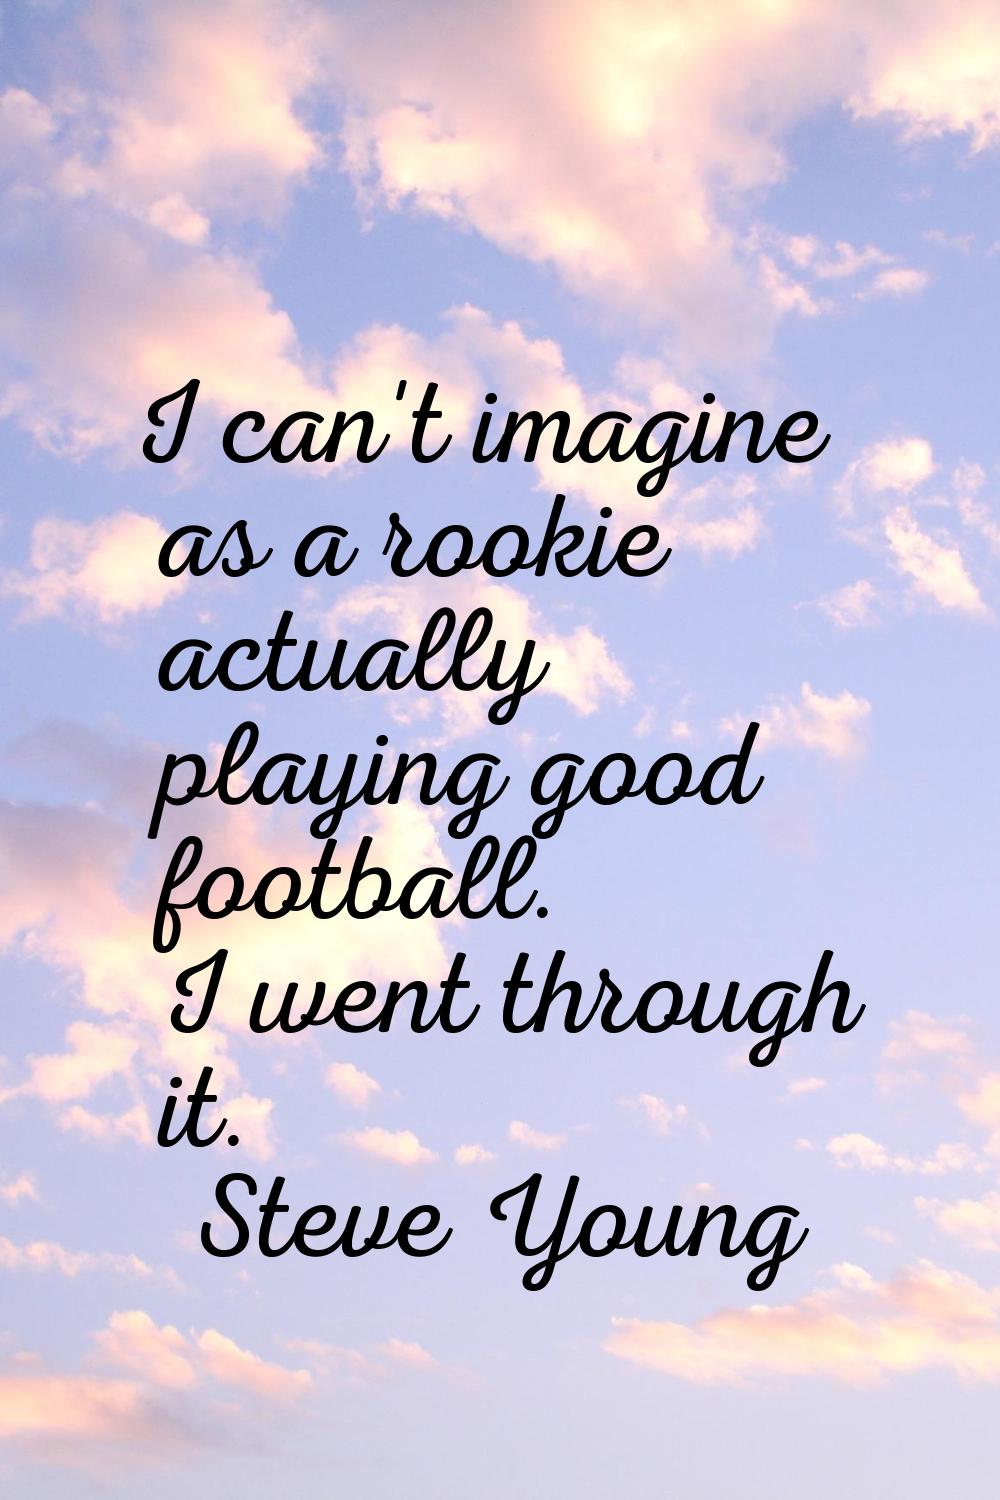 I can't imagine as a rookie actually playing good football. I went through it.